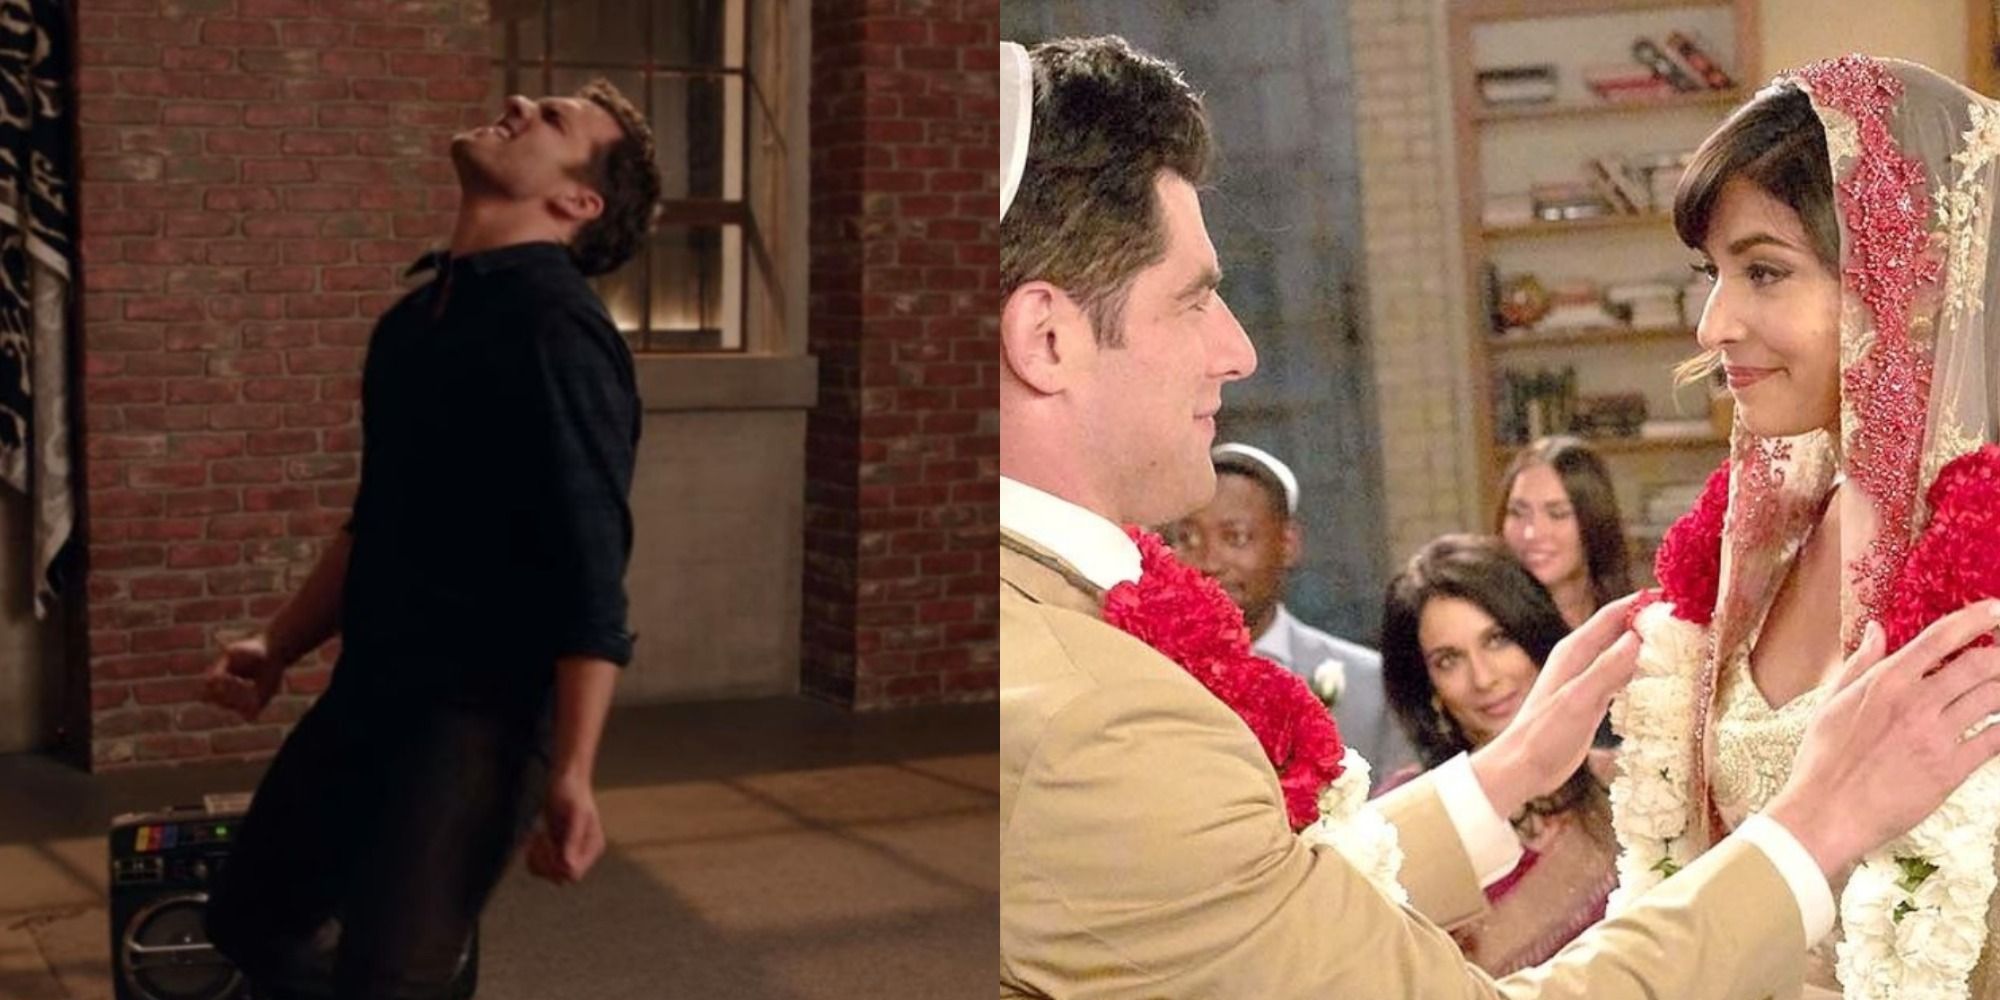 Two side by side memorable song moments in New Girl